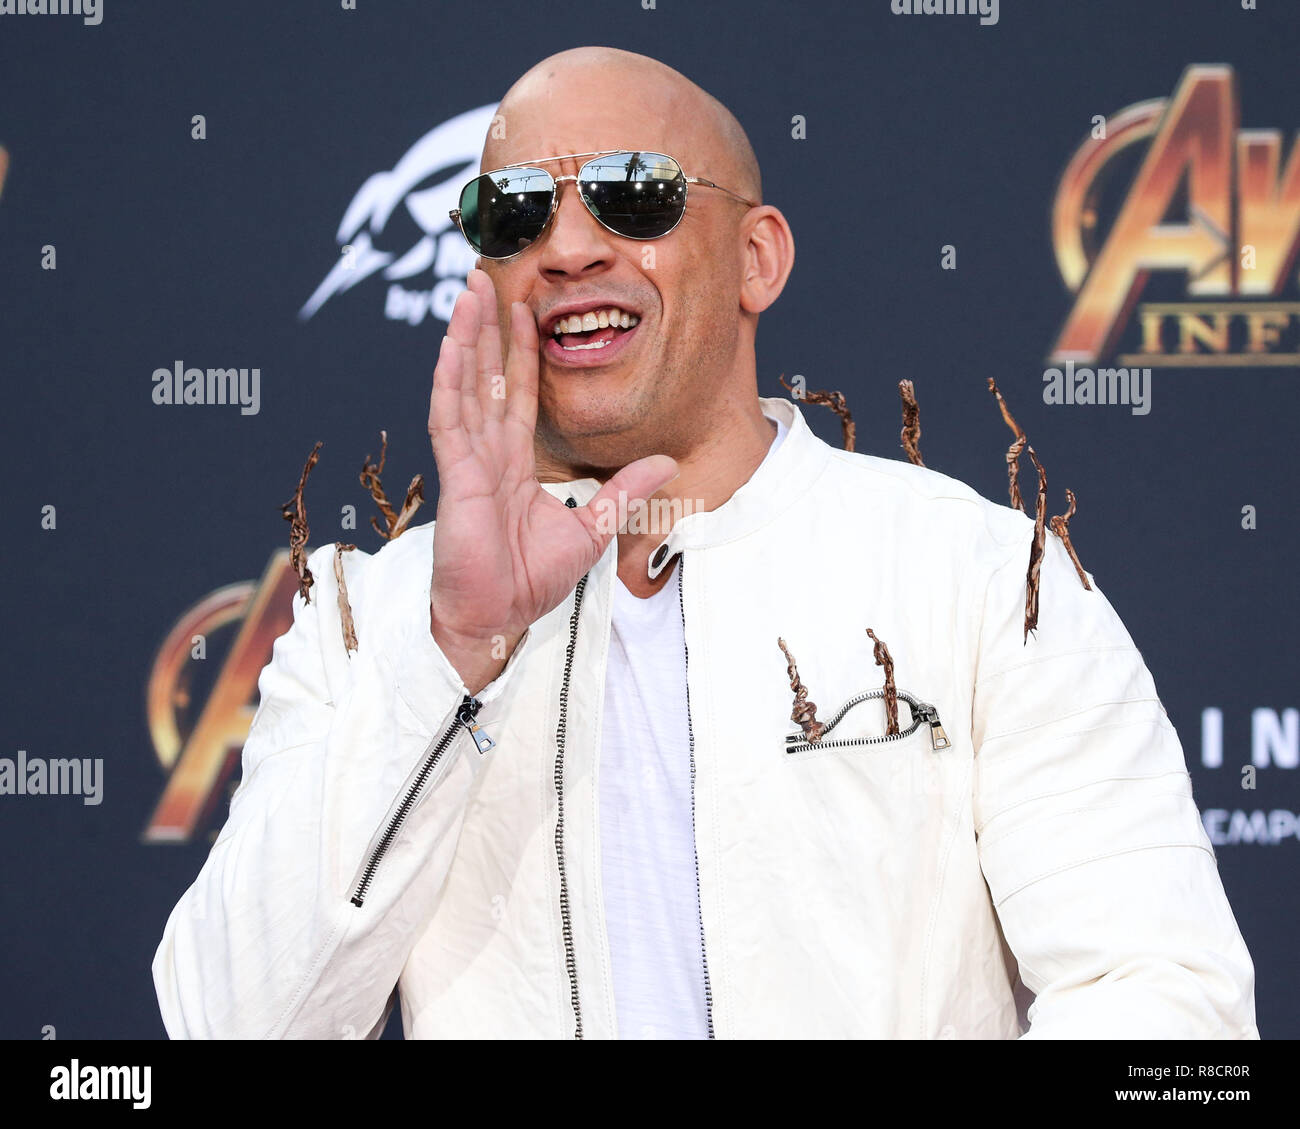 HOLLYWOOD, LOS ANGELES, CA, USA - APRIL 23: Vin Diesel at the World Premiere Of Disney And Marvel's 'Avengers: Infinity War' held at the El Capitan Theatre, Dolby Theatre and TCL Chinese Theatre IMAX on April 23, 2018 in Hollywood, Los Angeles, California, United States. (Photo by Xavier Collin/Image Press Agency) Stock Photo